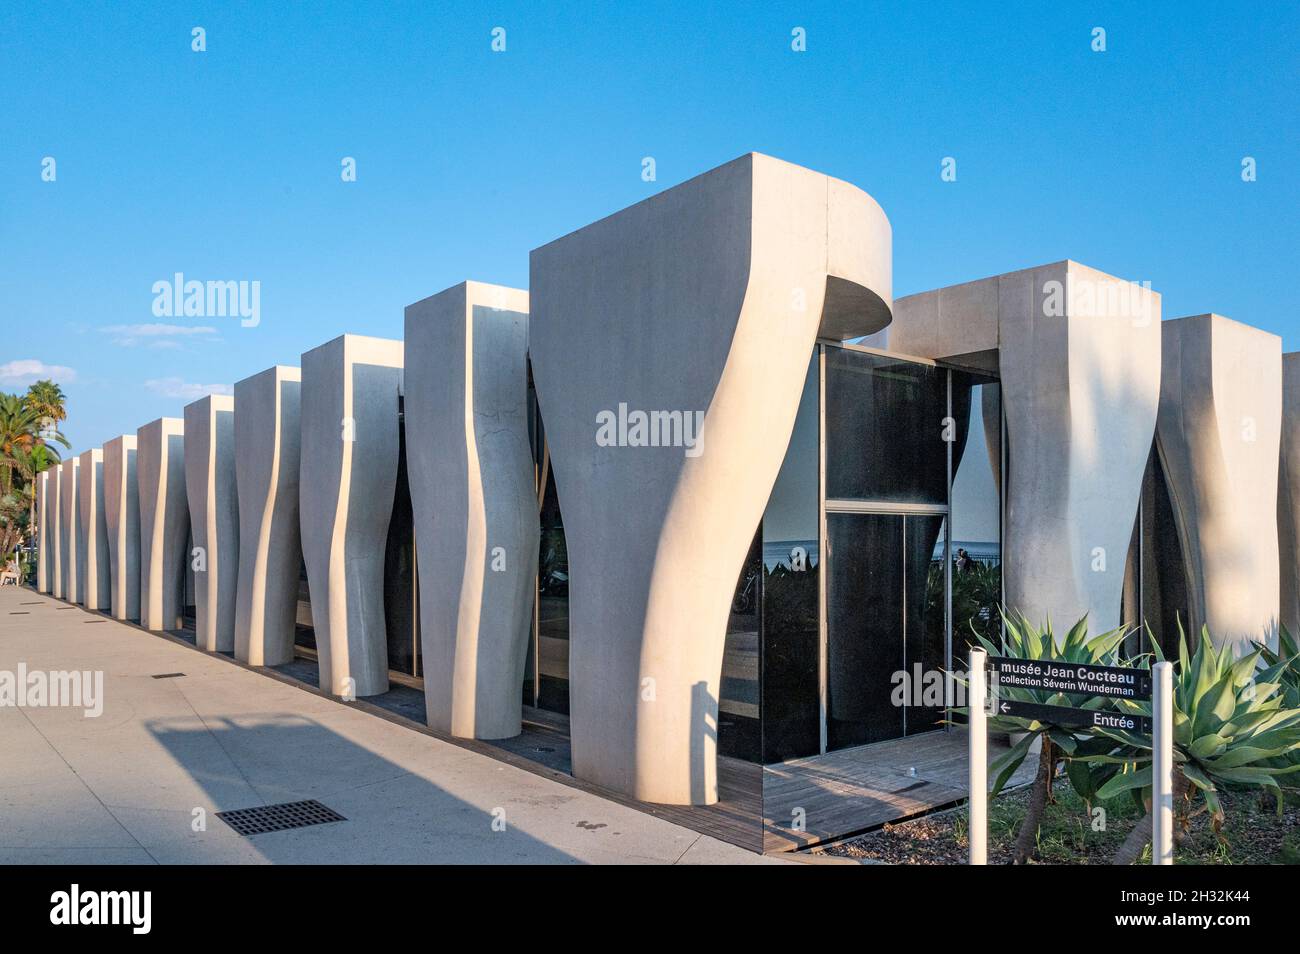 The collection Séverin Wunderman of the Musée Jean Cocteau, designed by  Rudy Riciotti in the heart of Menton, French Riviera Stock Photo - Alamy